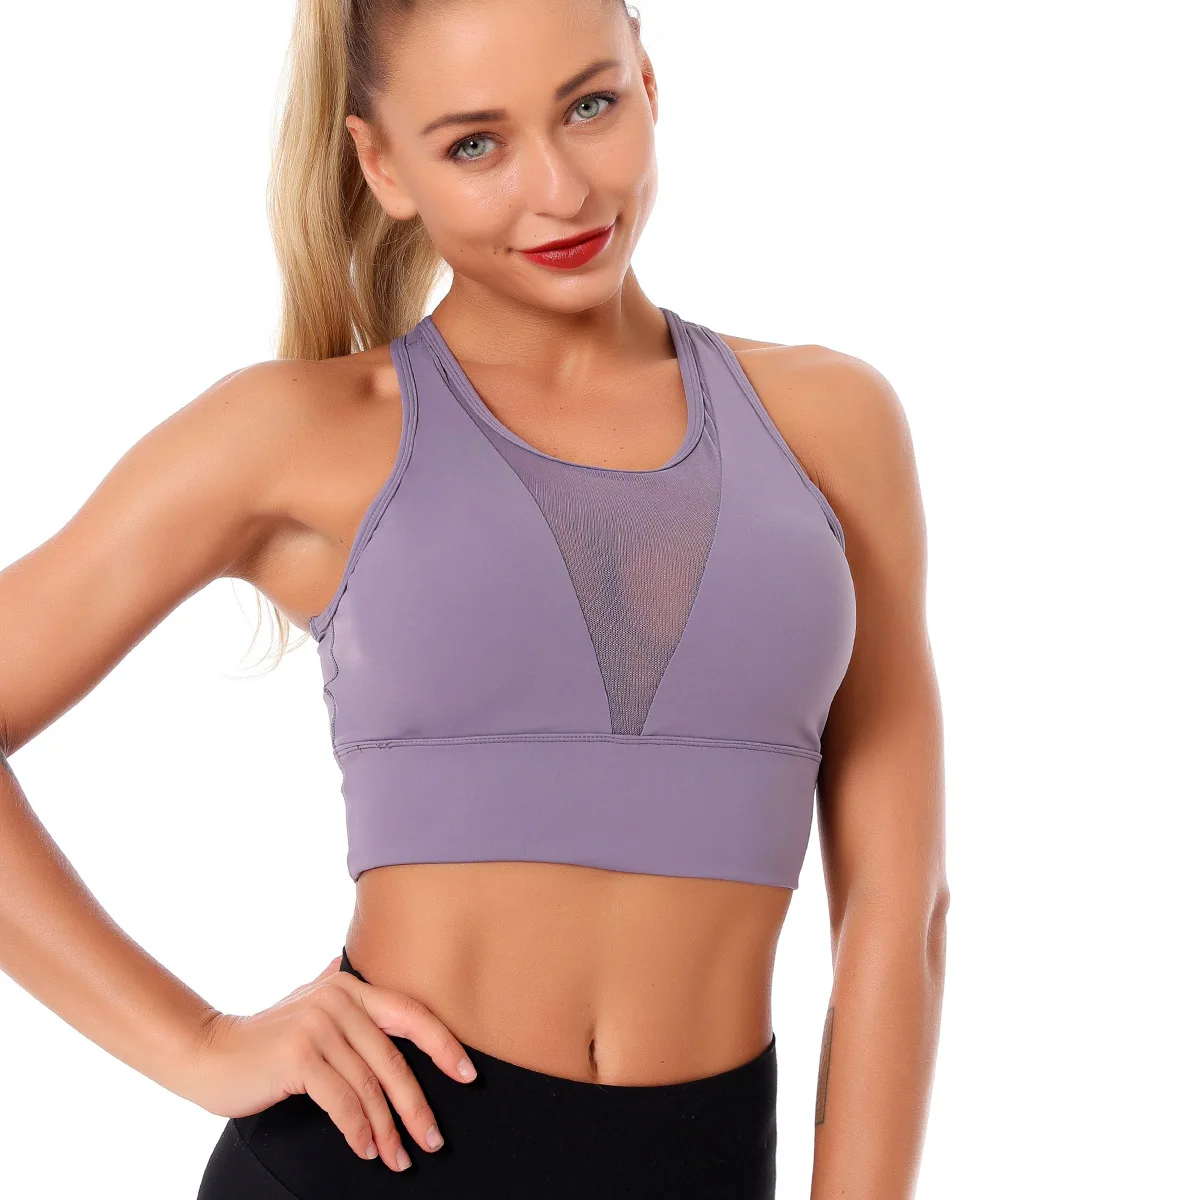 Women Hollow out Padded Sports Bra Gym Yoga Workout Fitness Shaper Vest Crop Top 